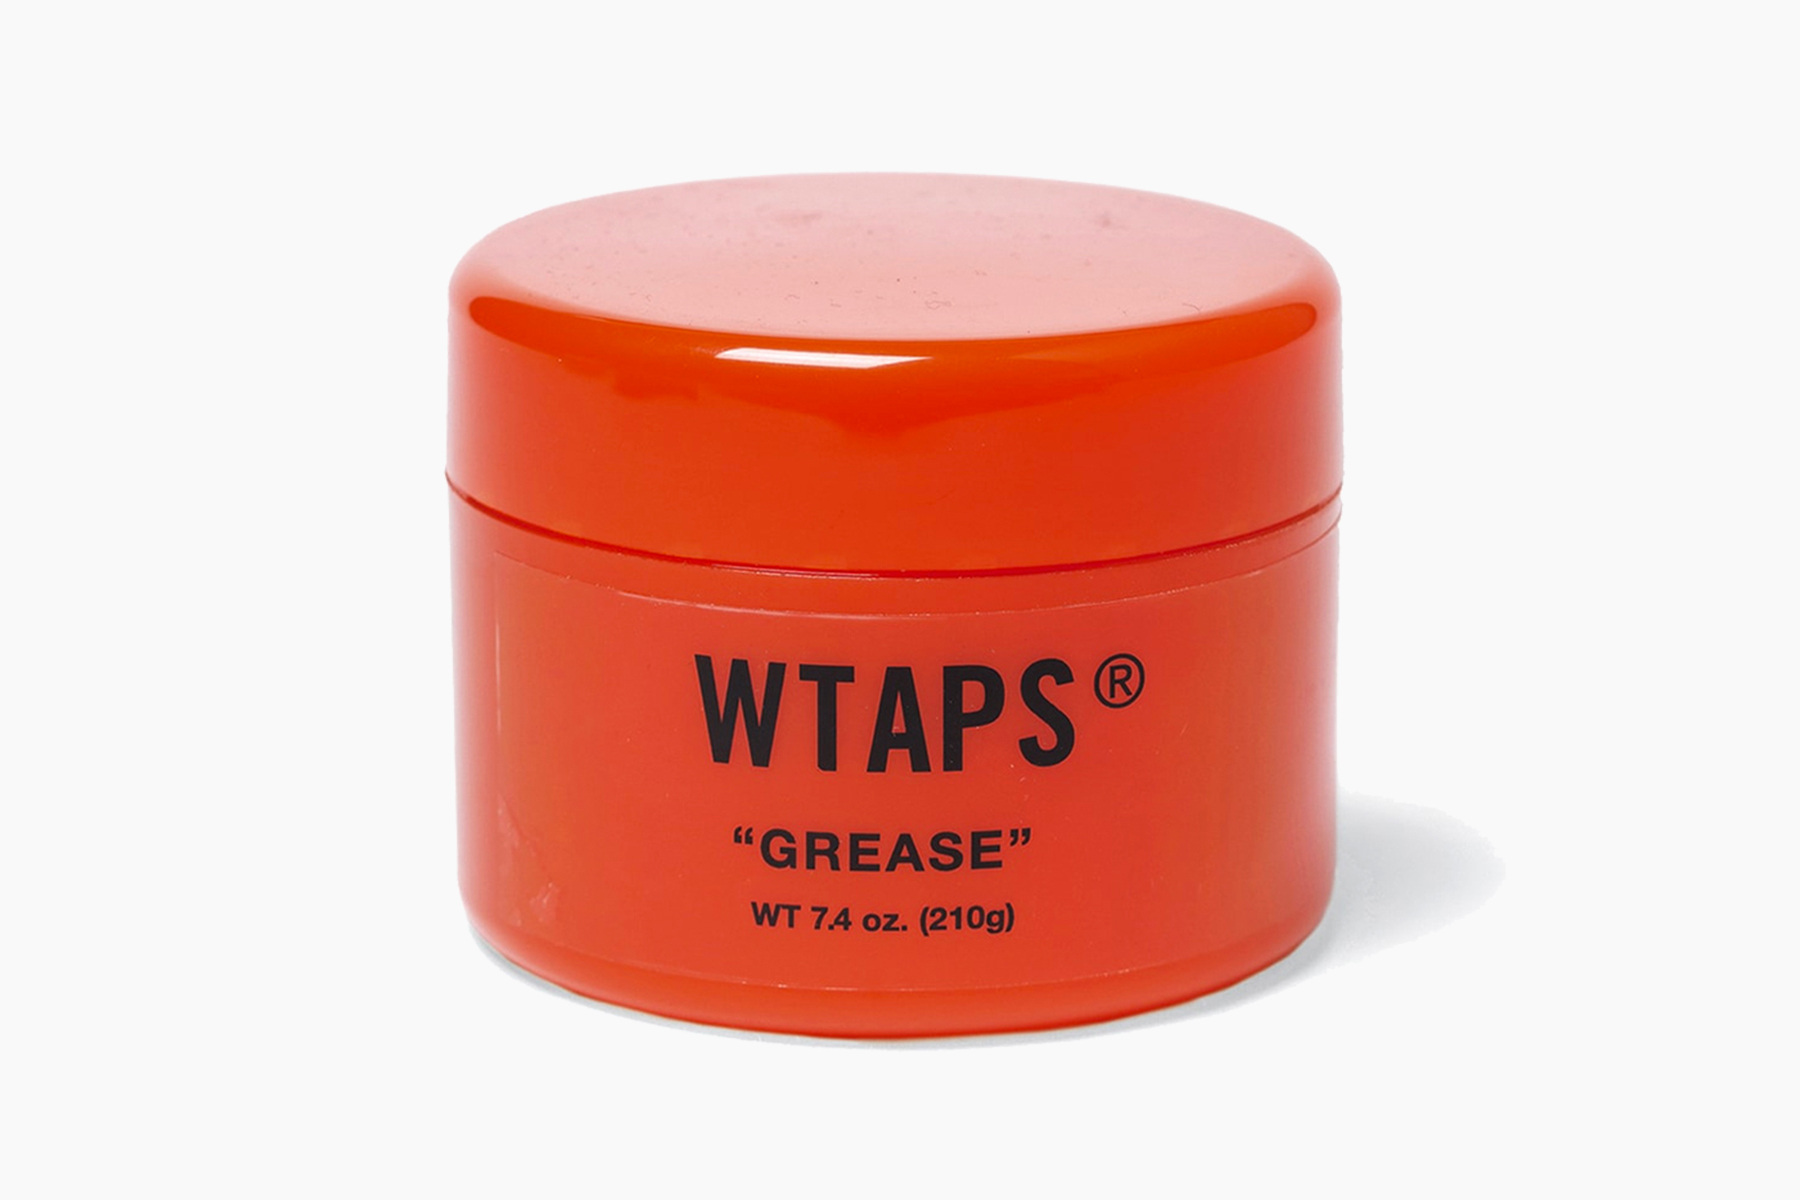 WTAPS Hair Grease Release 2020 | Drops | Hypebeast